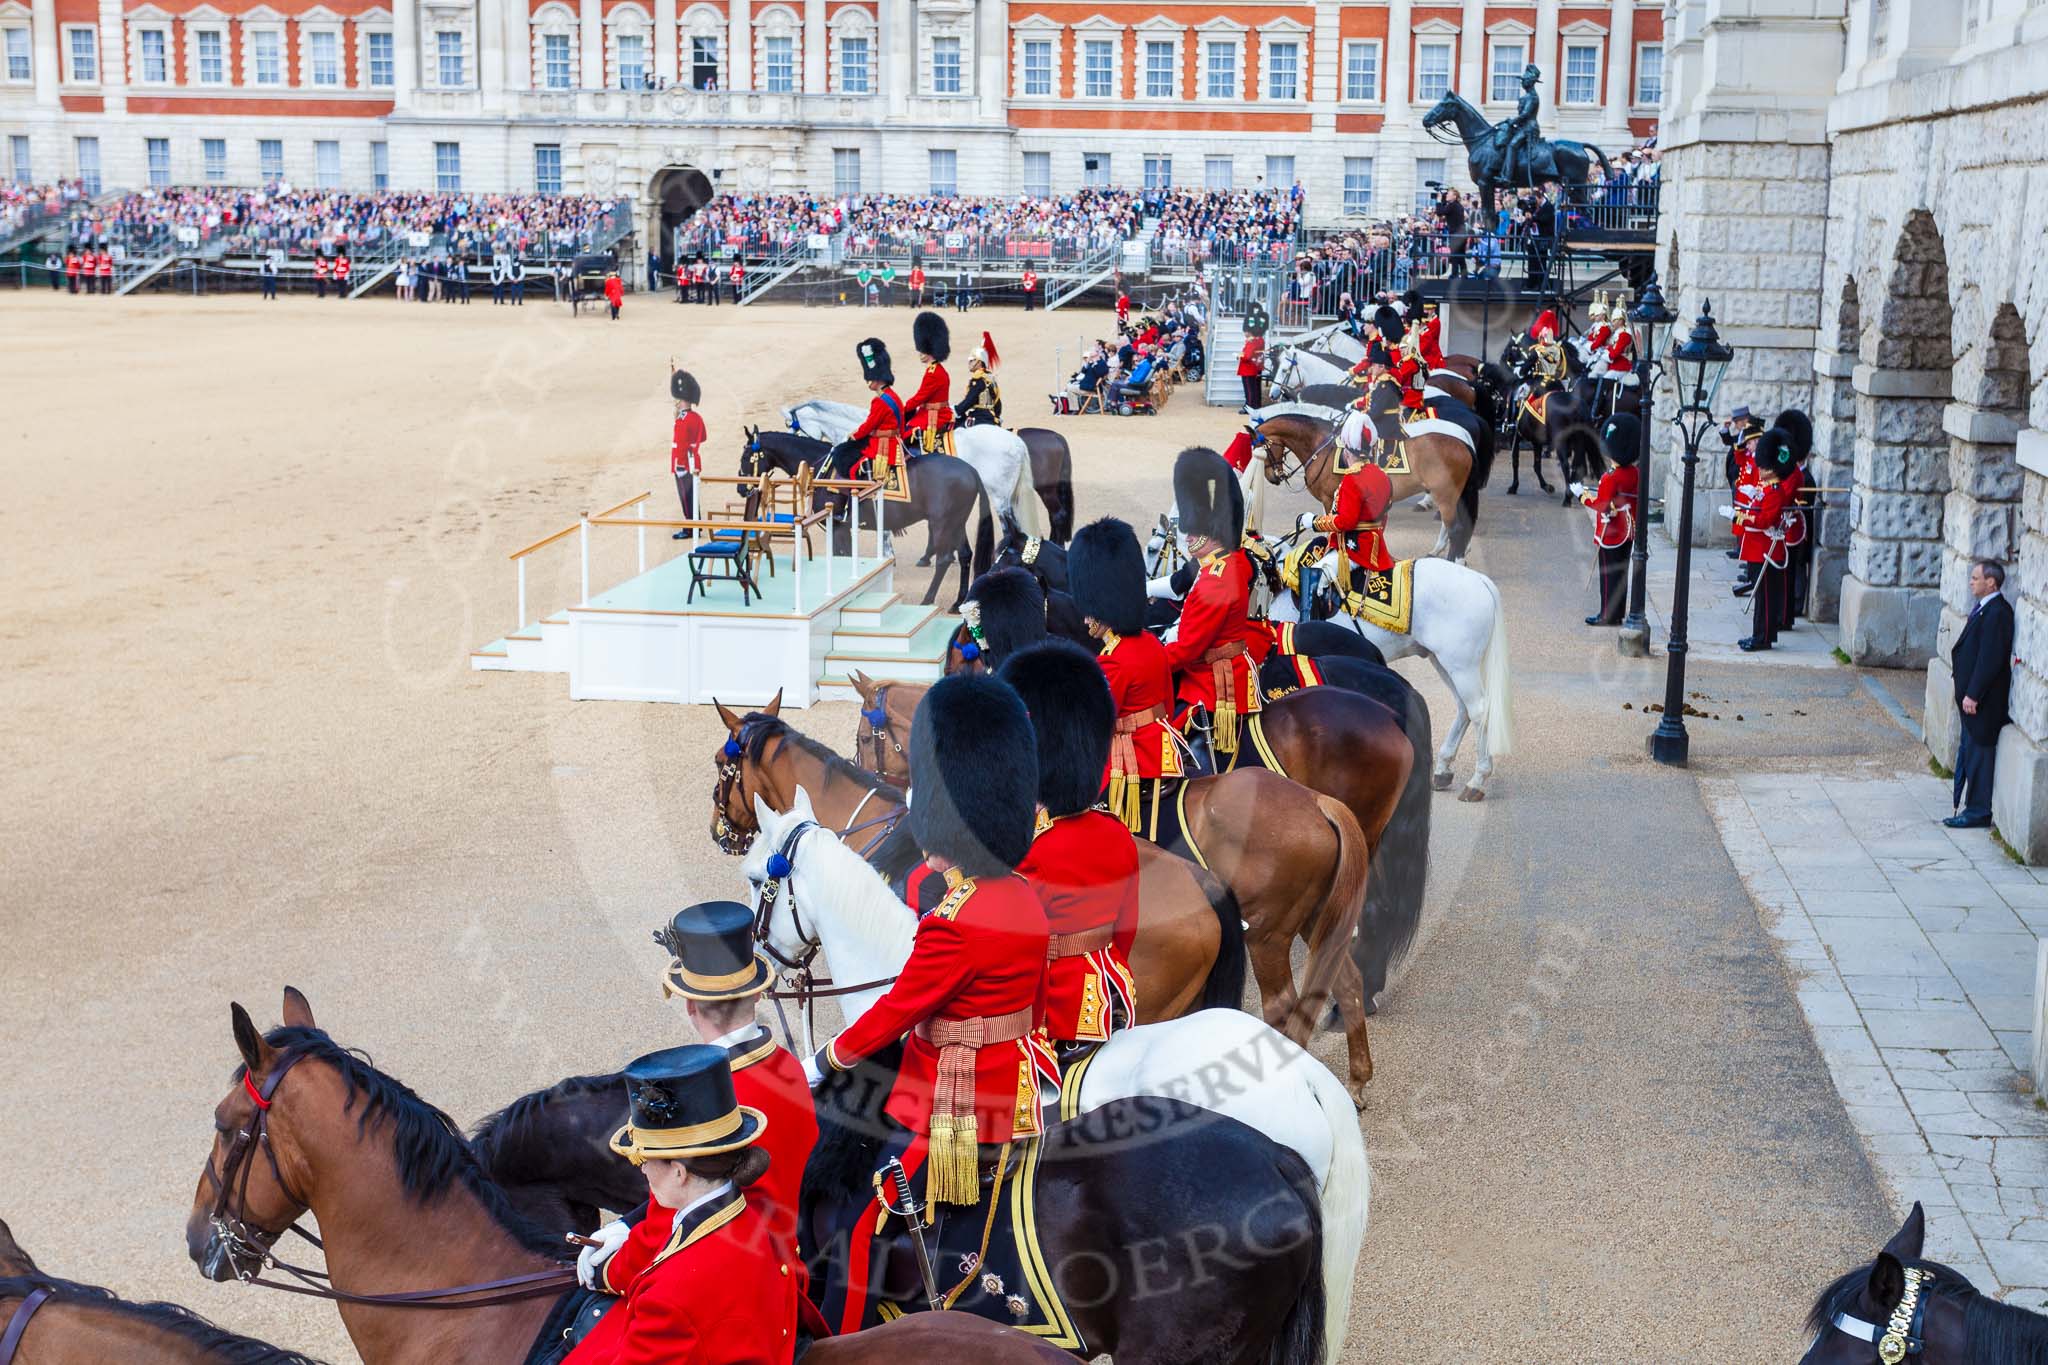 The Colonel's Review 2015.
Horse Guards Parade, Westminster,
London,

United Kingdom,
on 06 June 2015 at 11:06, image #240